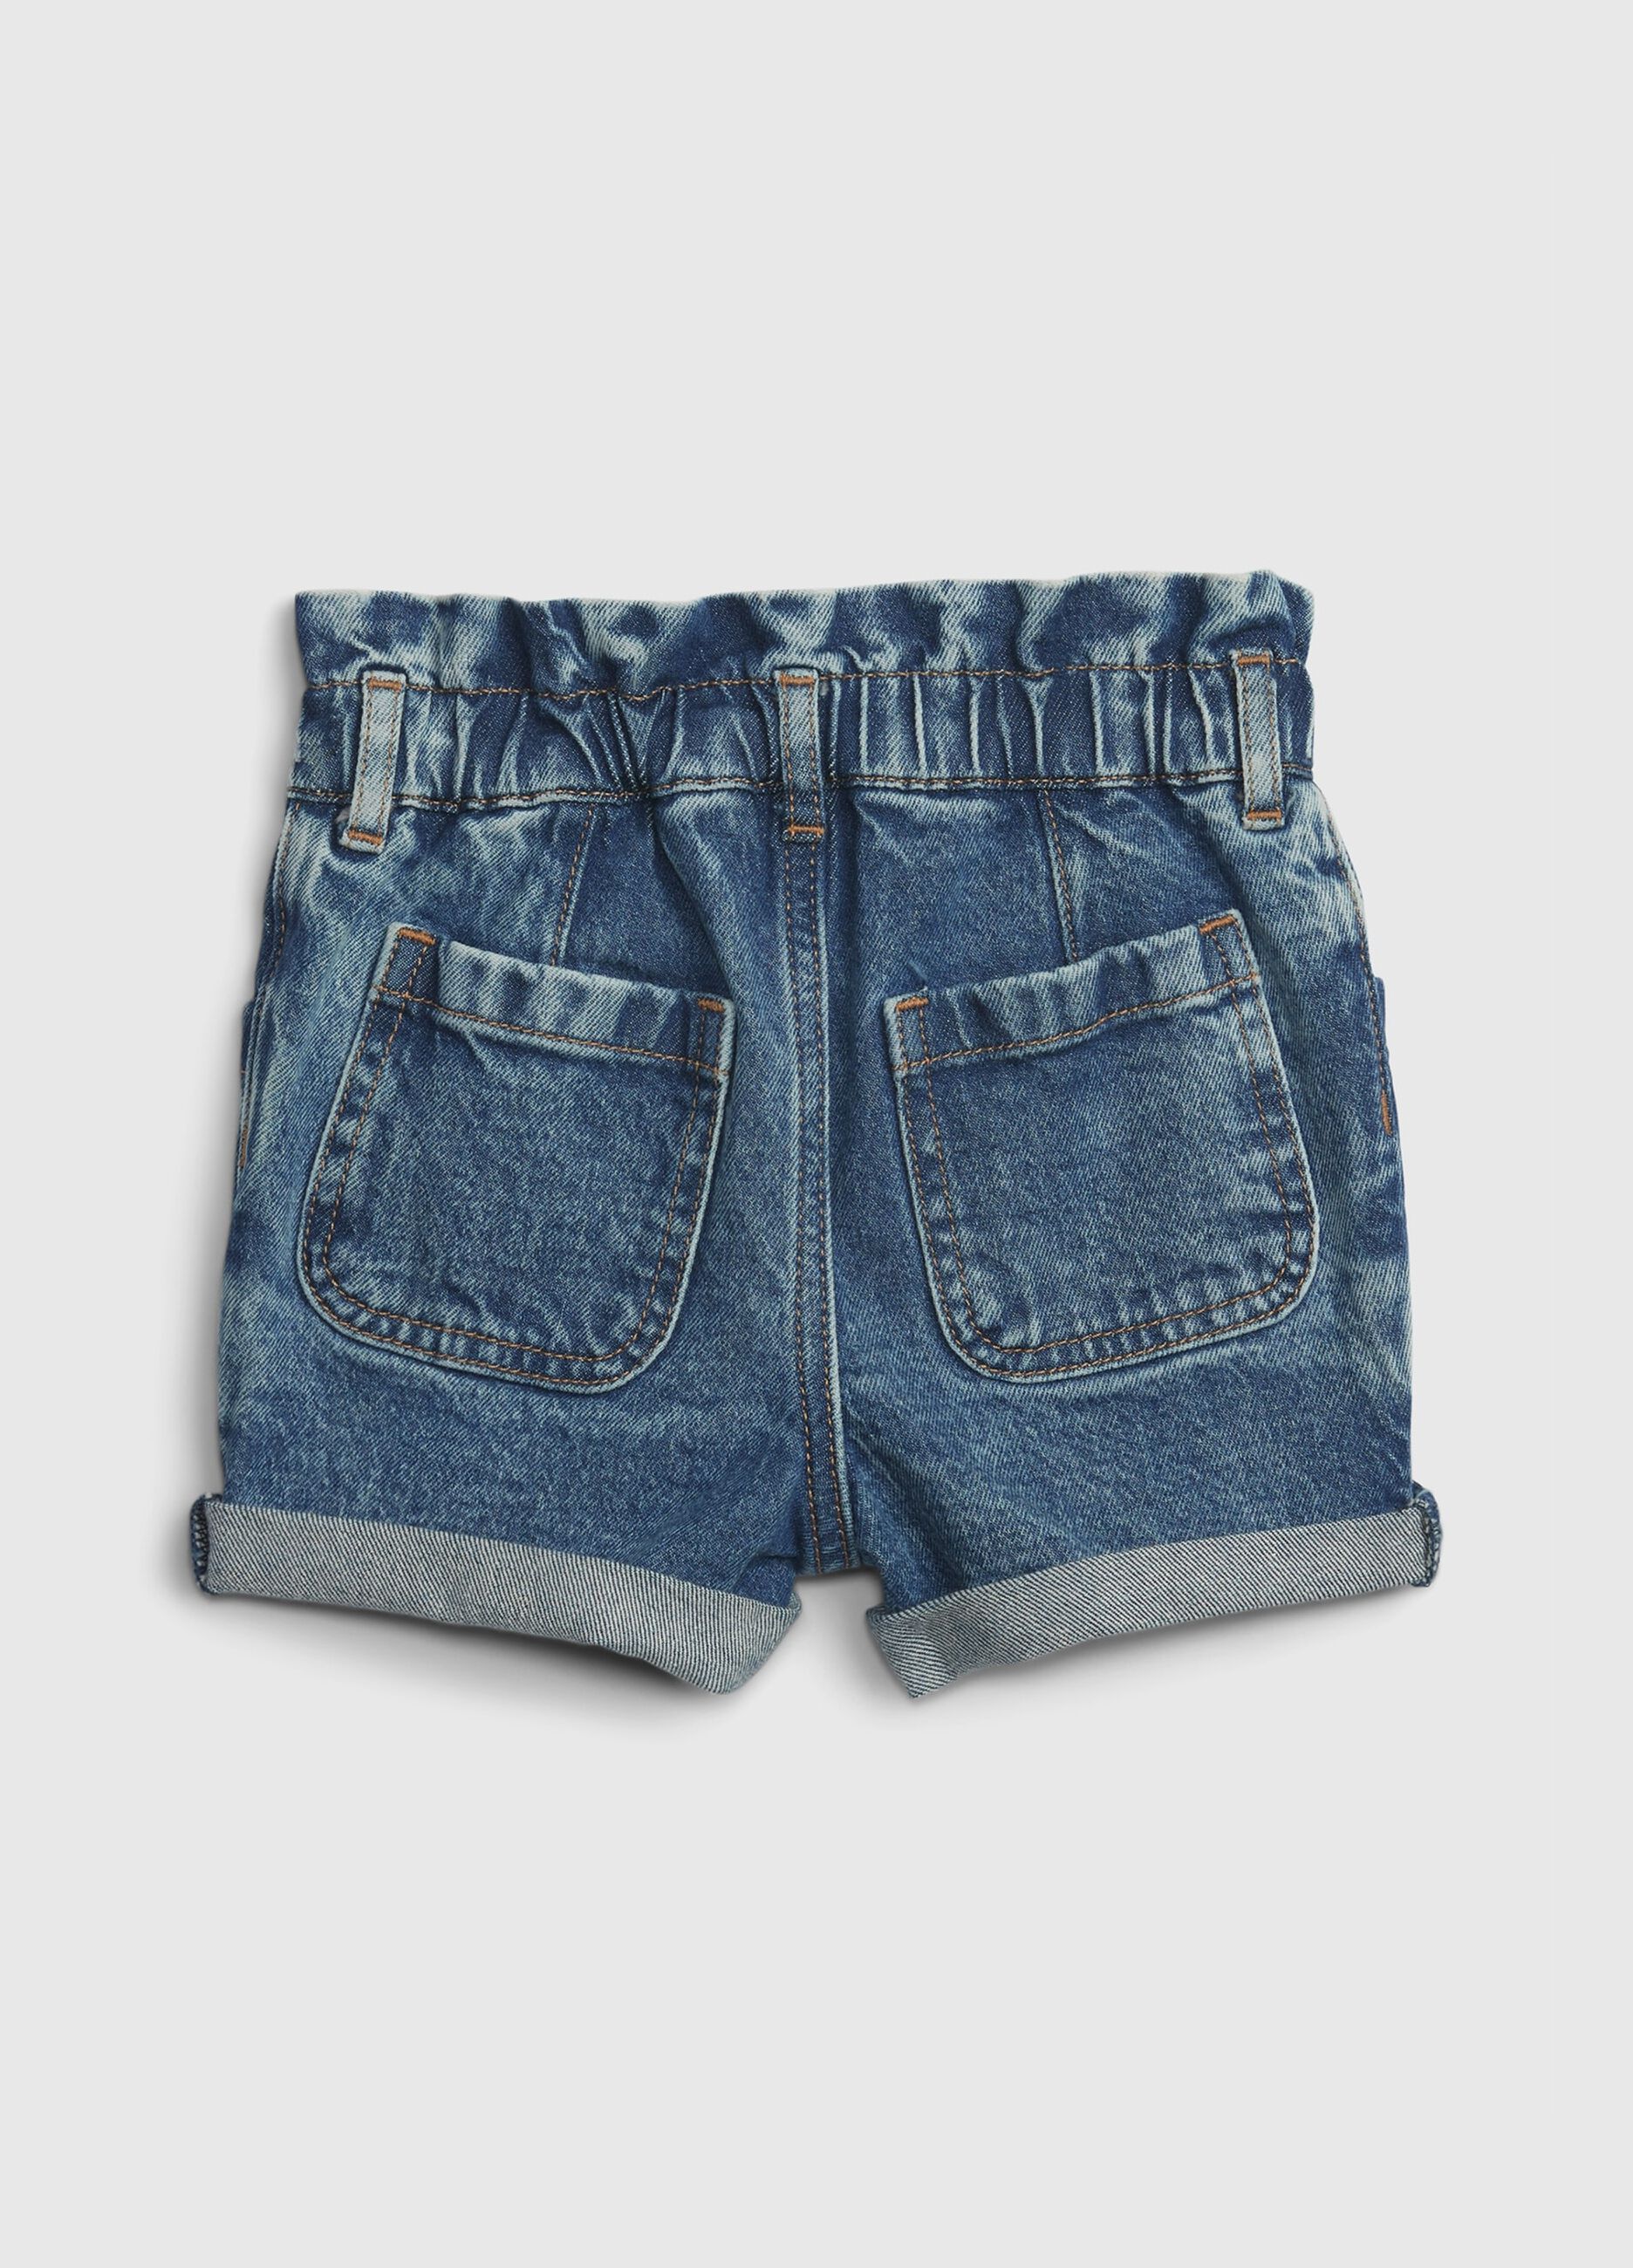 Mum-fit shorts with pockets